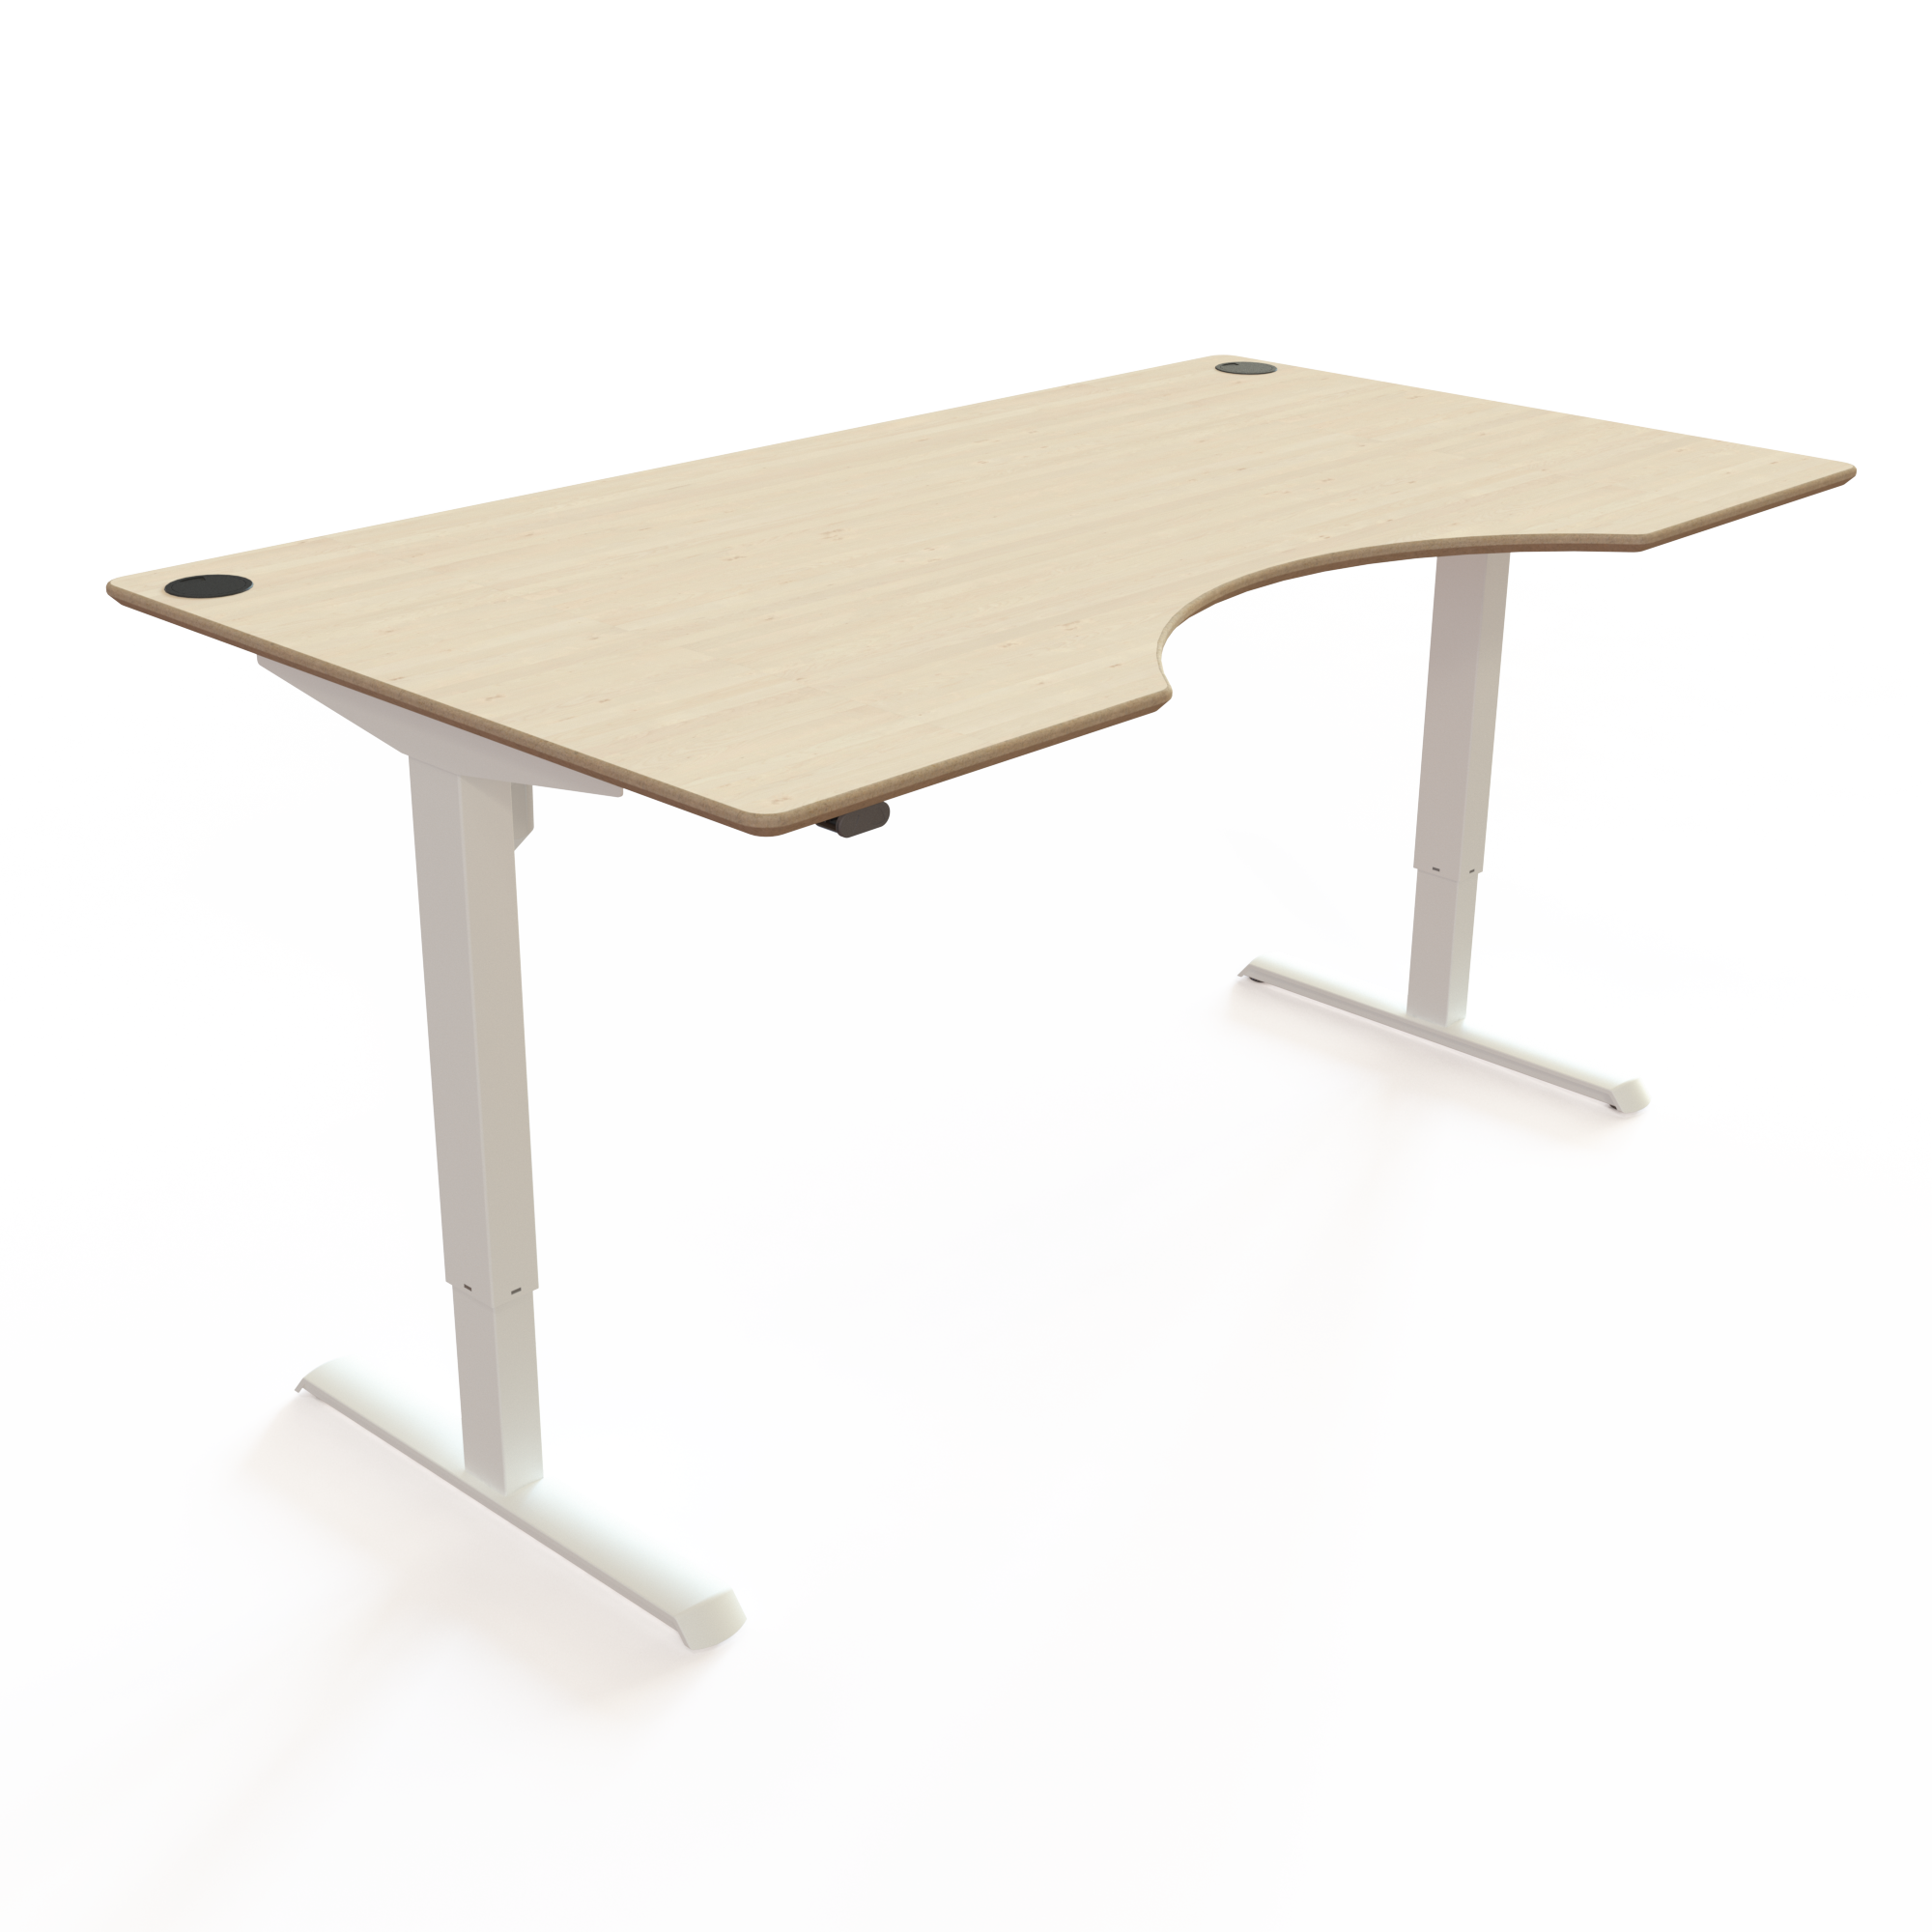 Electric Adjustable Desk | 180x100 cm | Maple with white frame